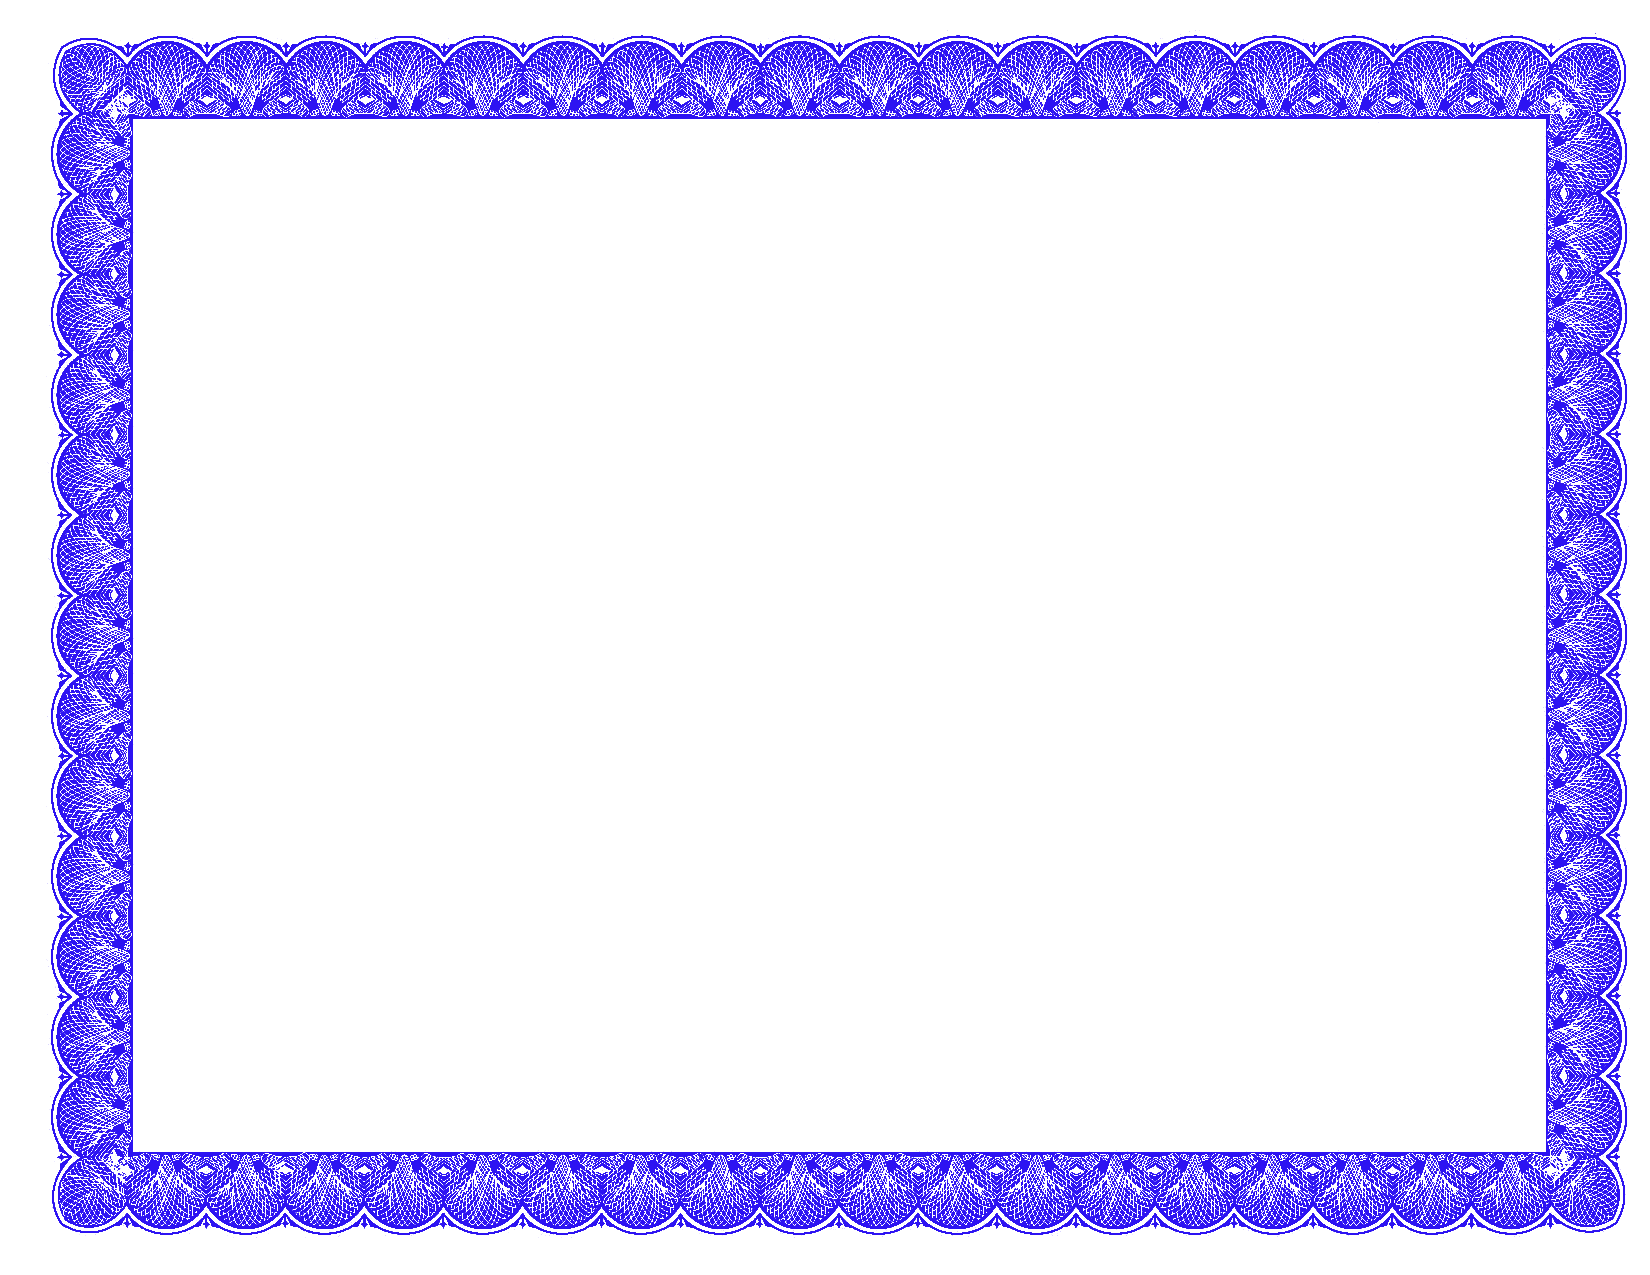 Certificate Frame PNG Image